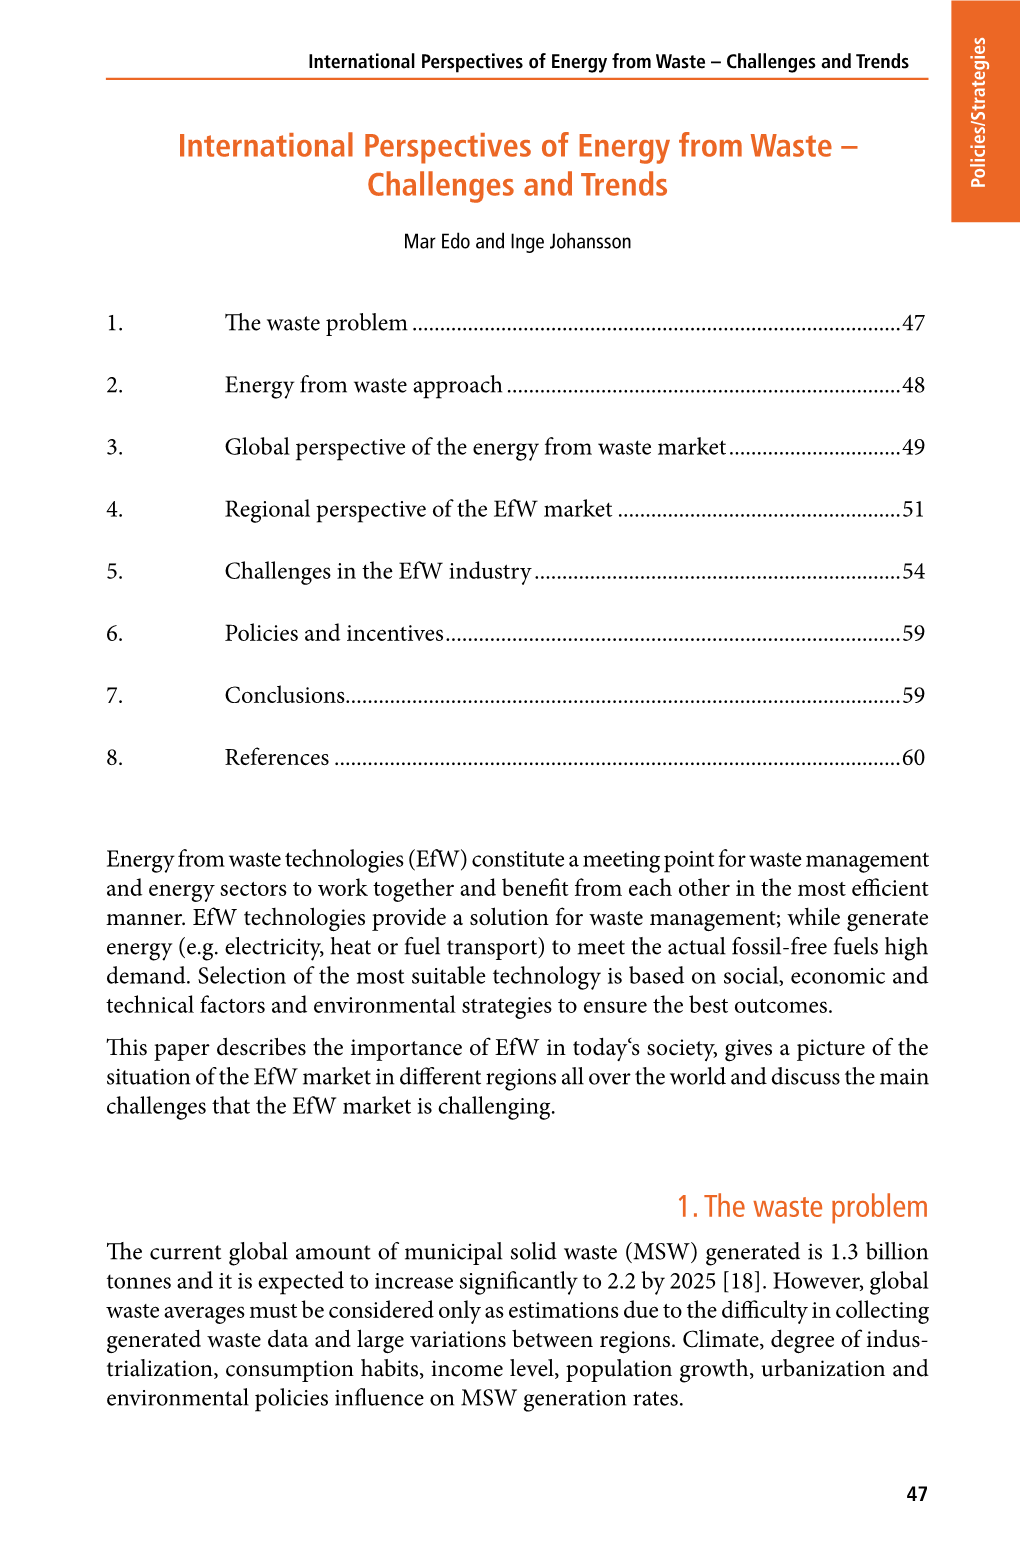 International Perspectives of Energy from Waste – Challenges and Trends